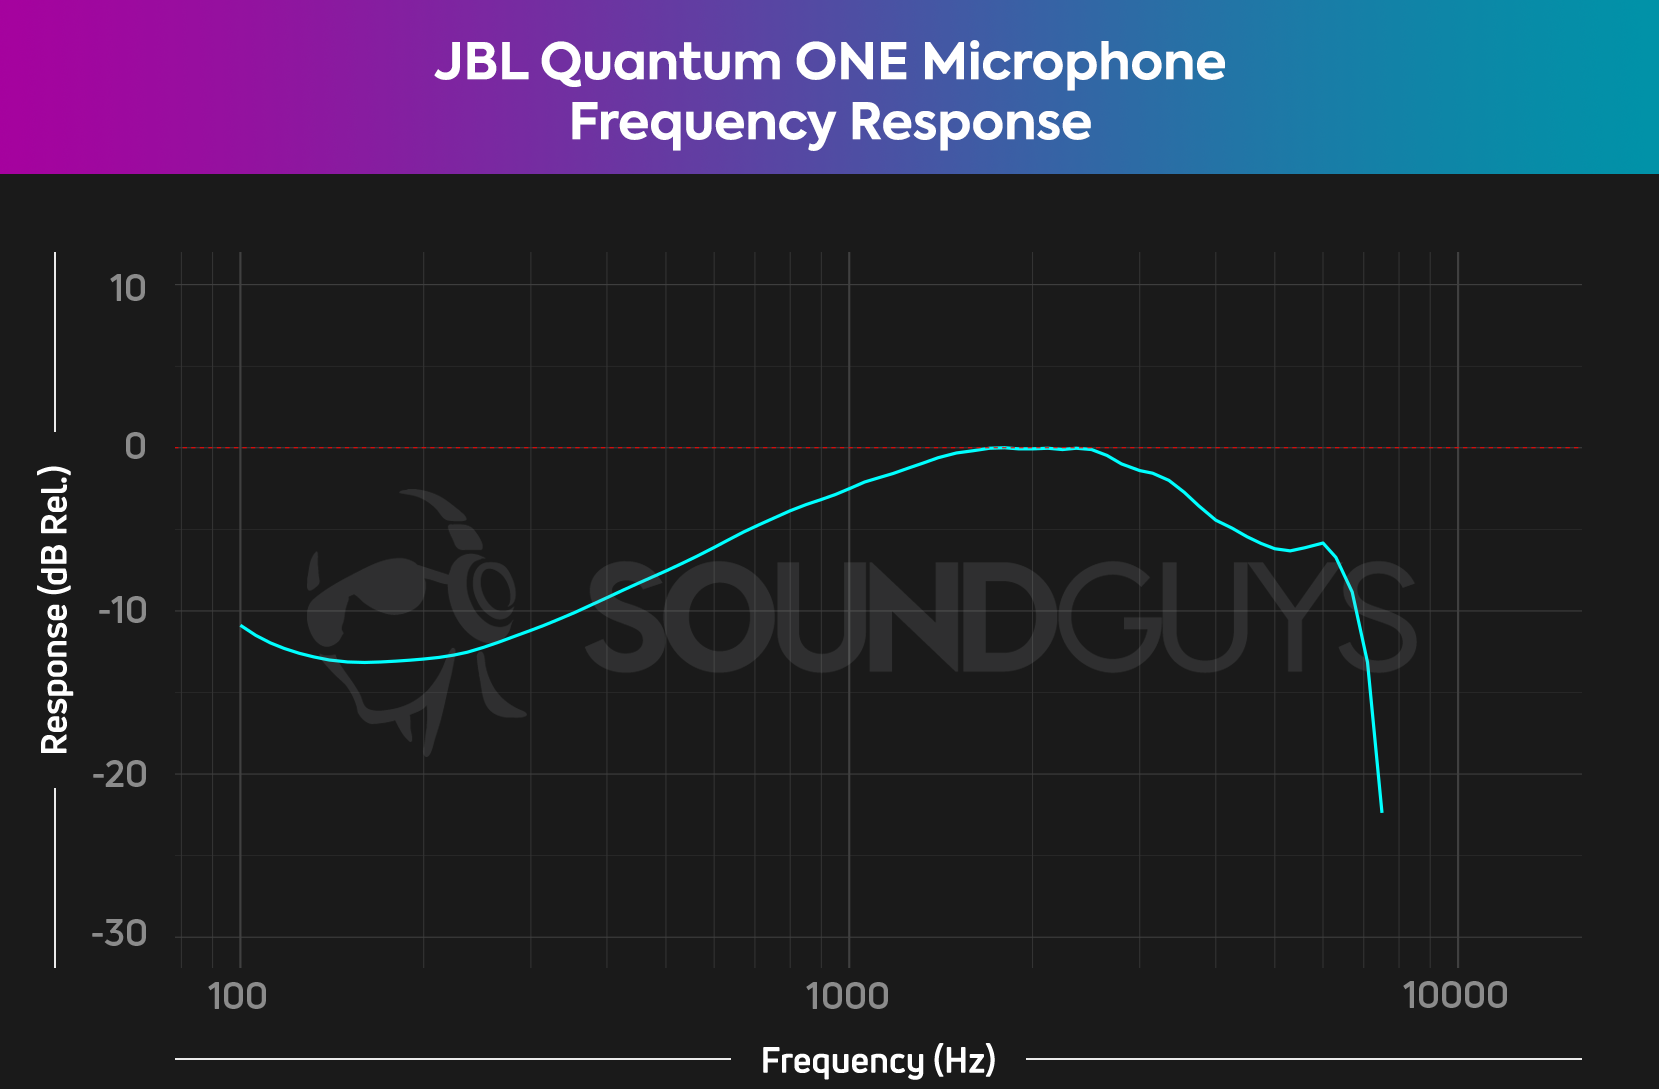 The JBL Quantum One Microphone frequency response chart, showing a noticeable bump in the high mid range.